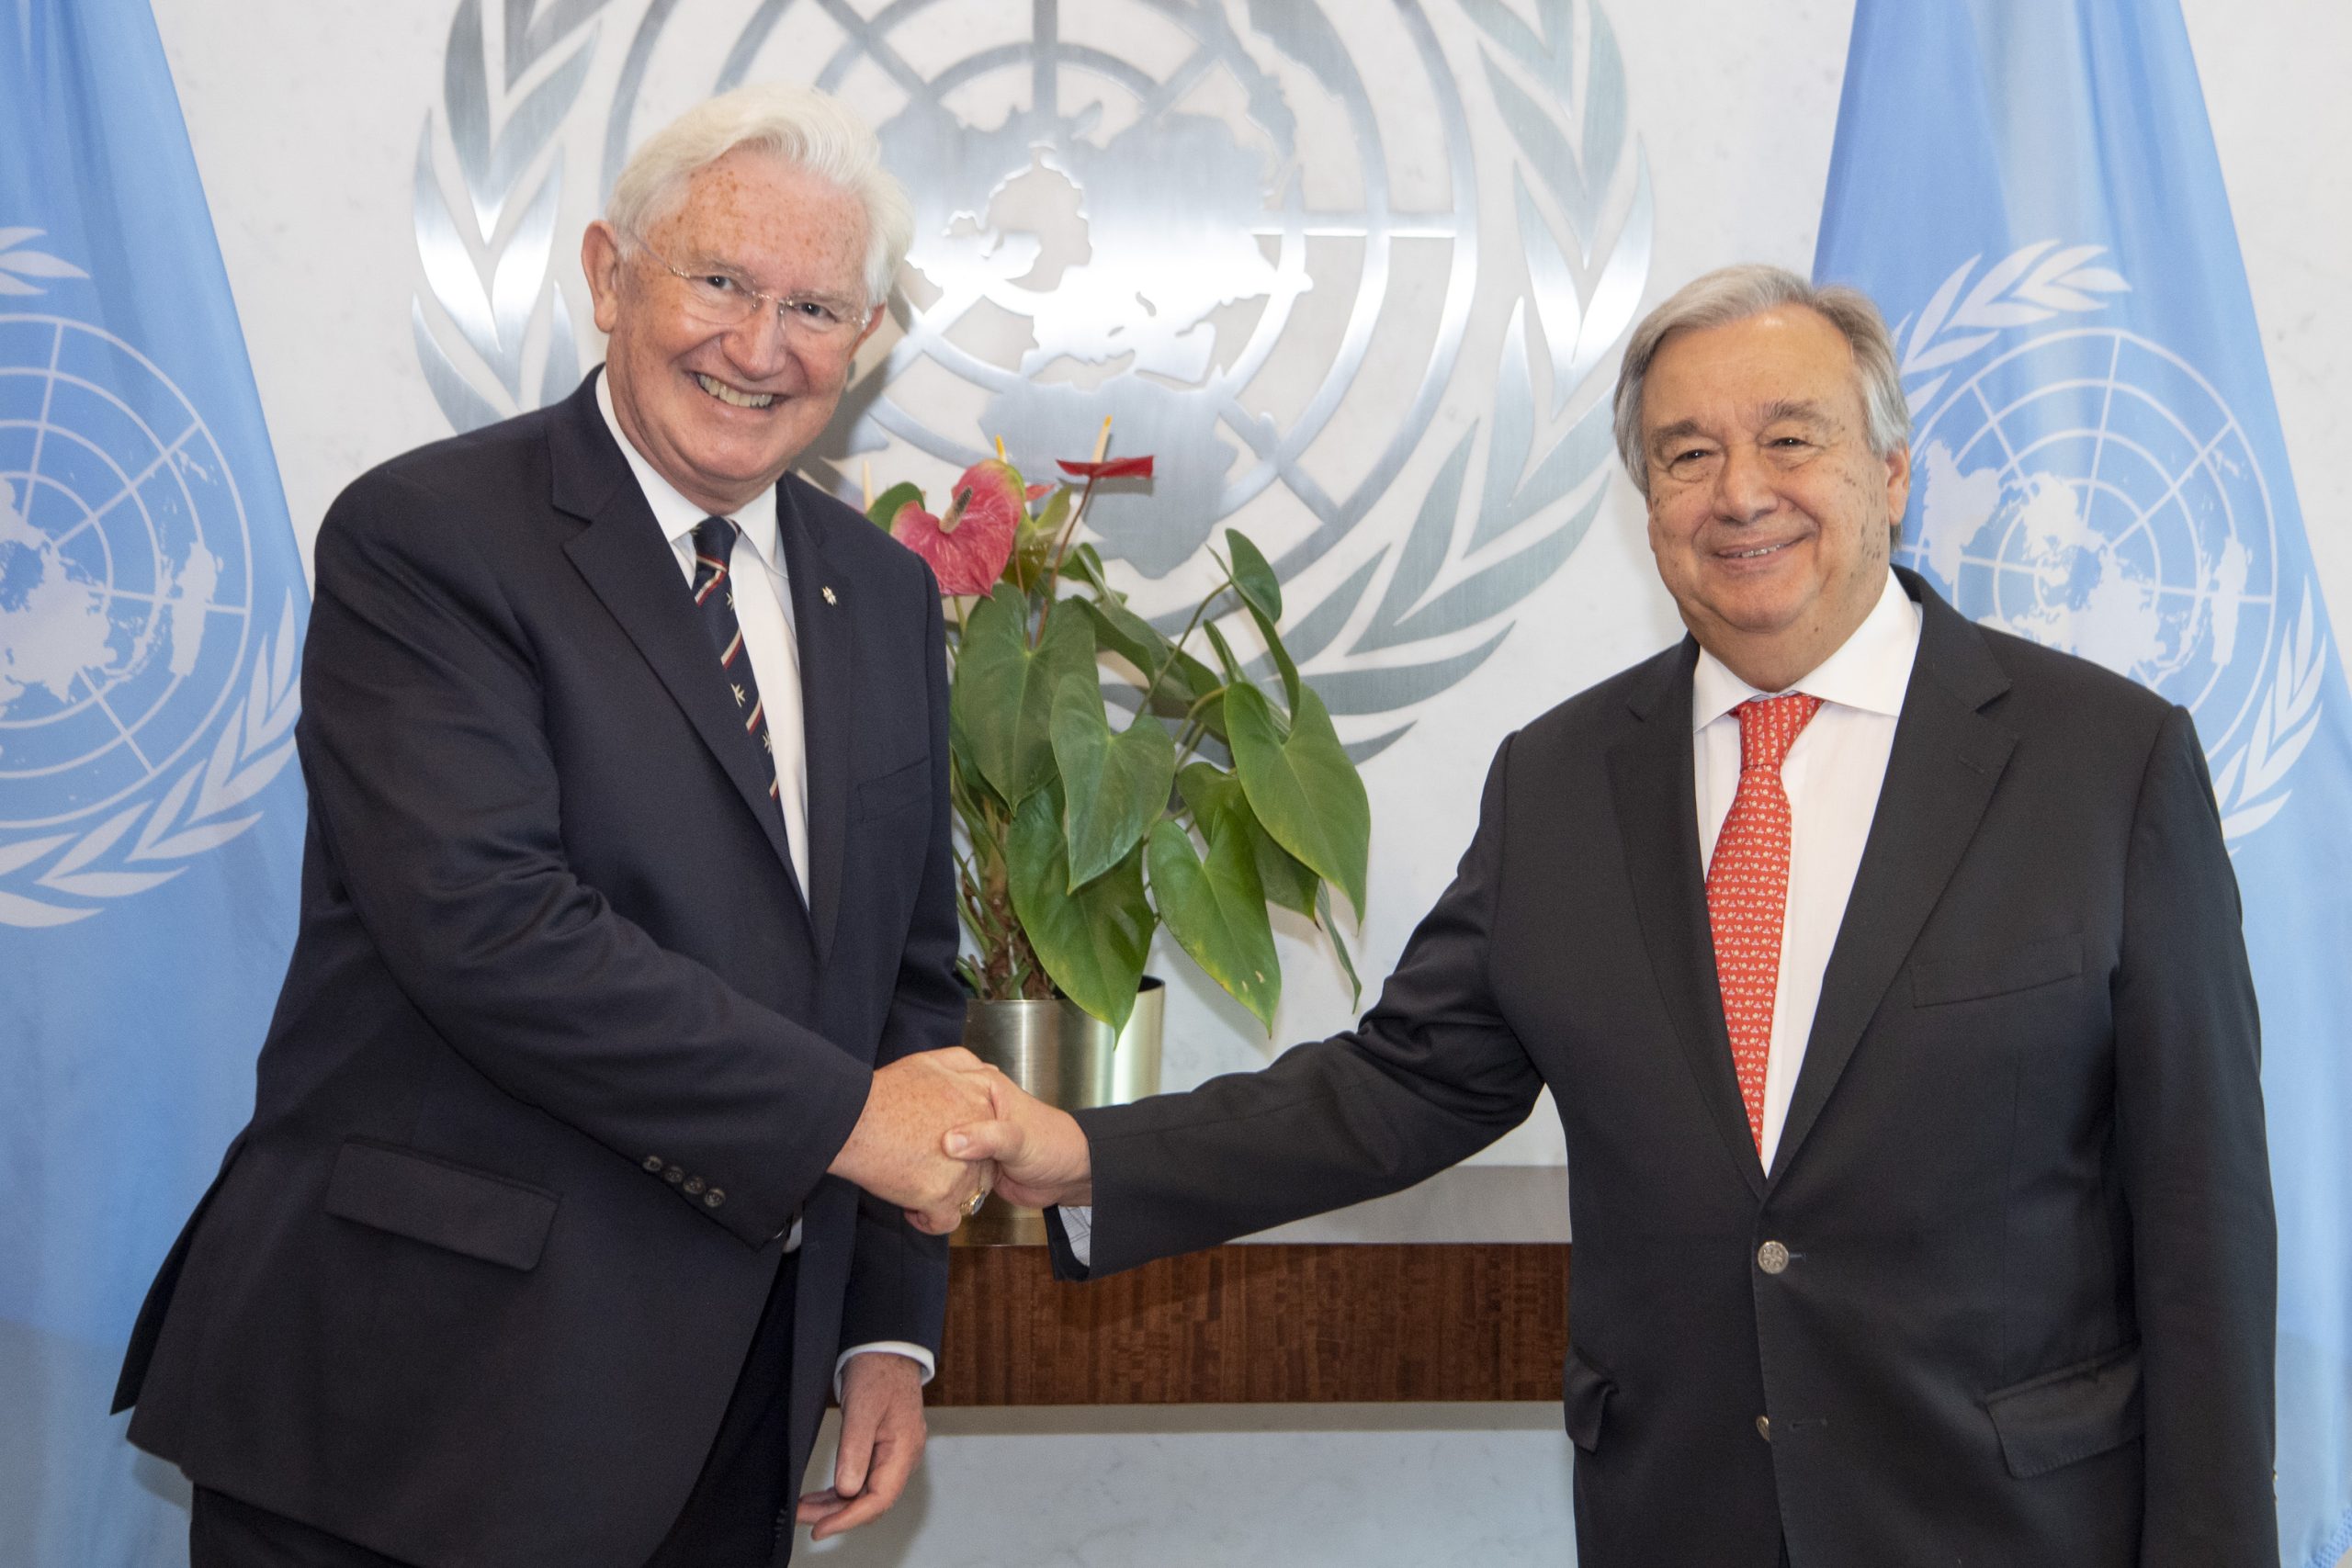 Presentation of Credentials by the Amb. Paul Beresford-Hill to the UN Secretary General